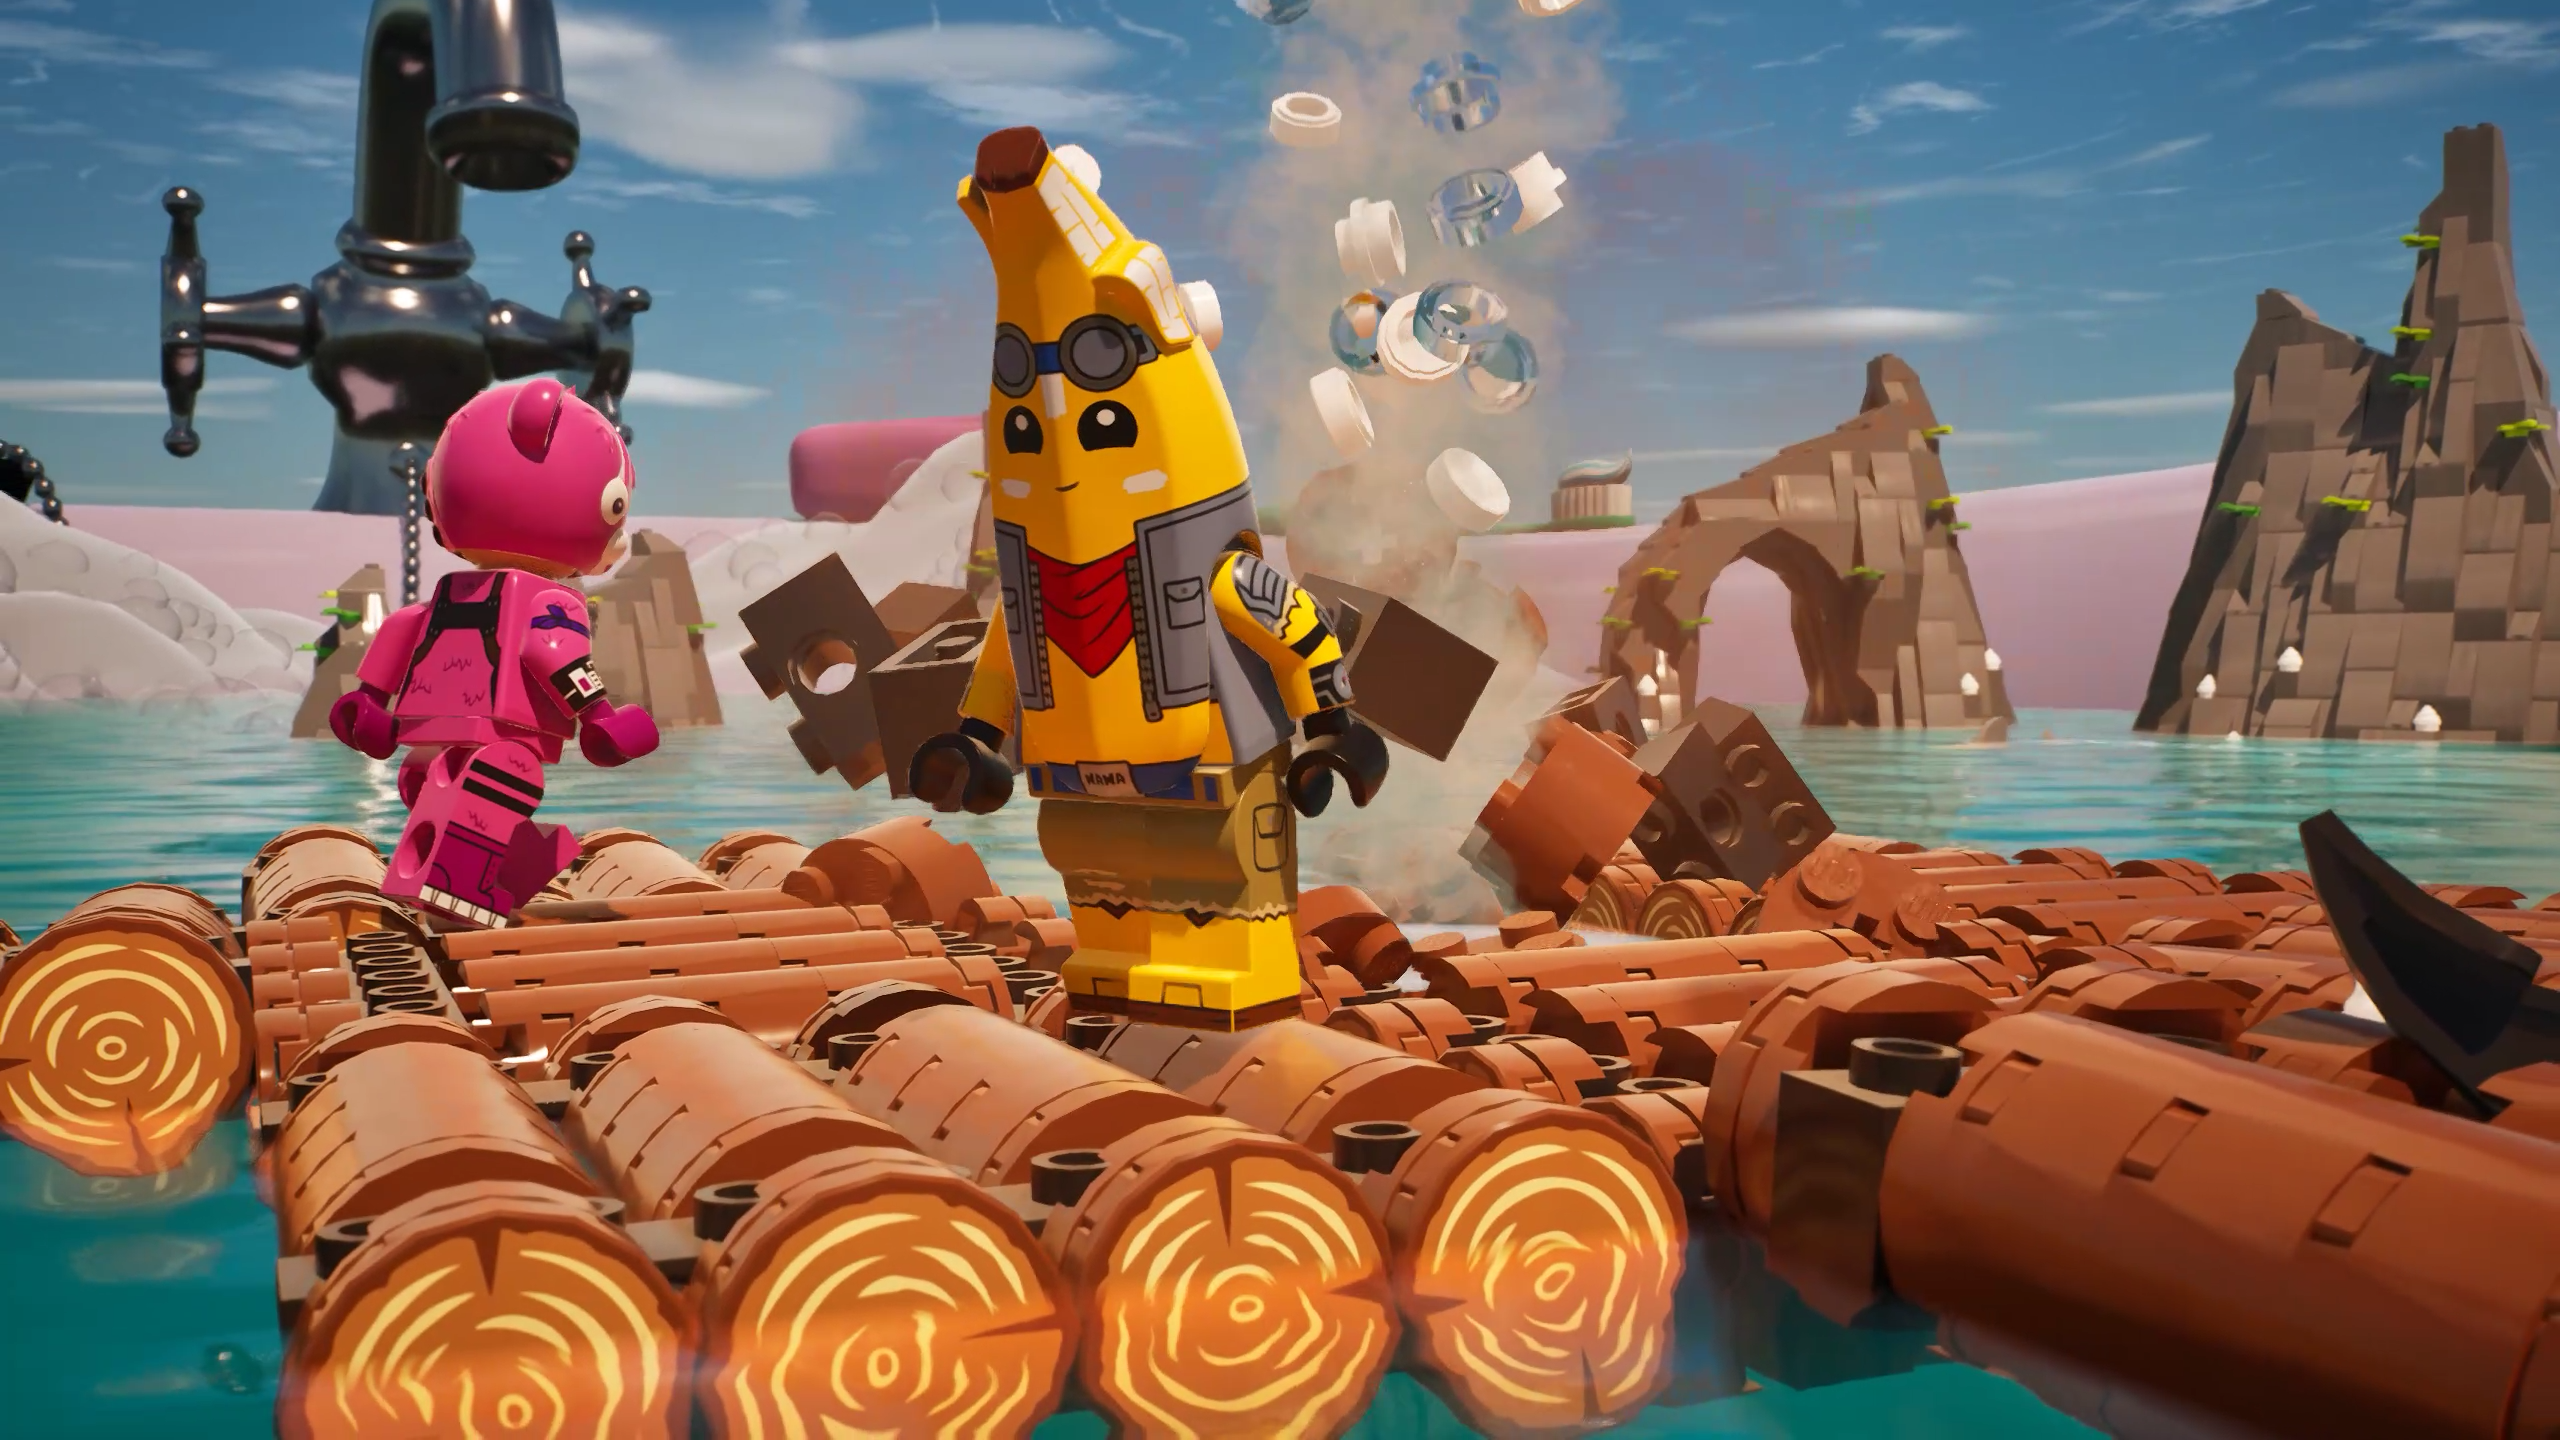 an image of Peely in Lego Raft Survival in Fortnite. It shows a Lego-version of Peely the banana mascot from Fortnite standing on a raft. 